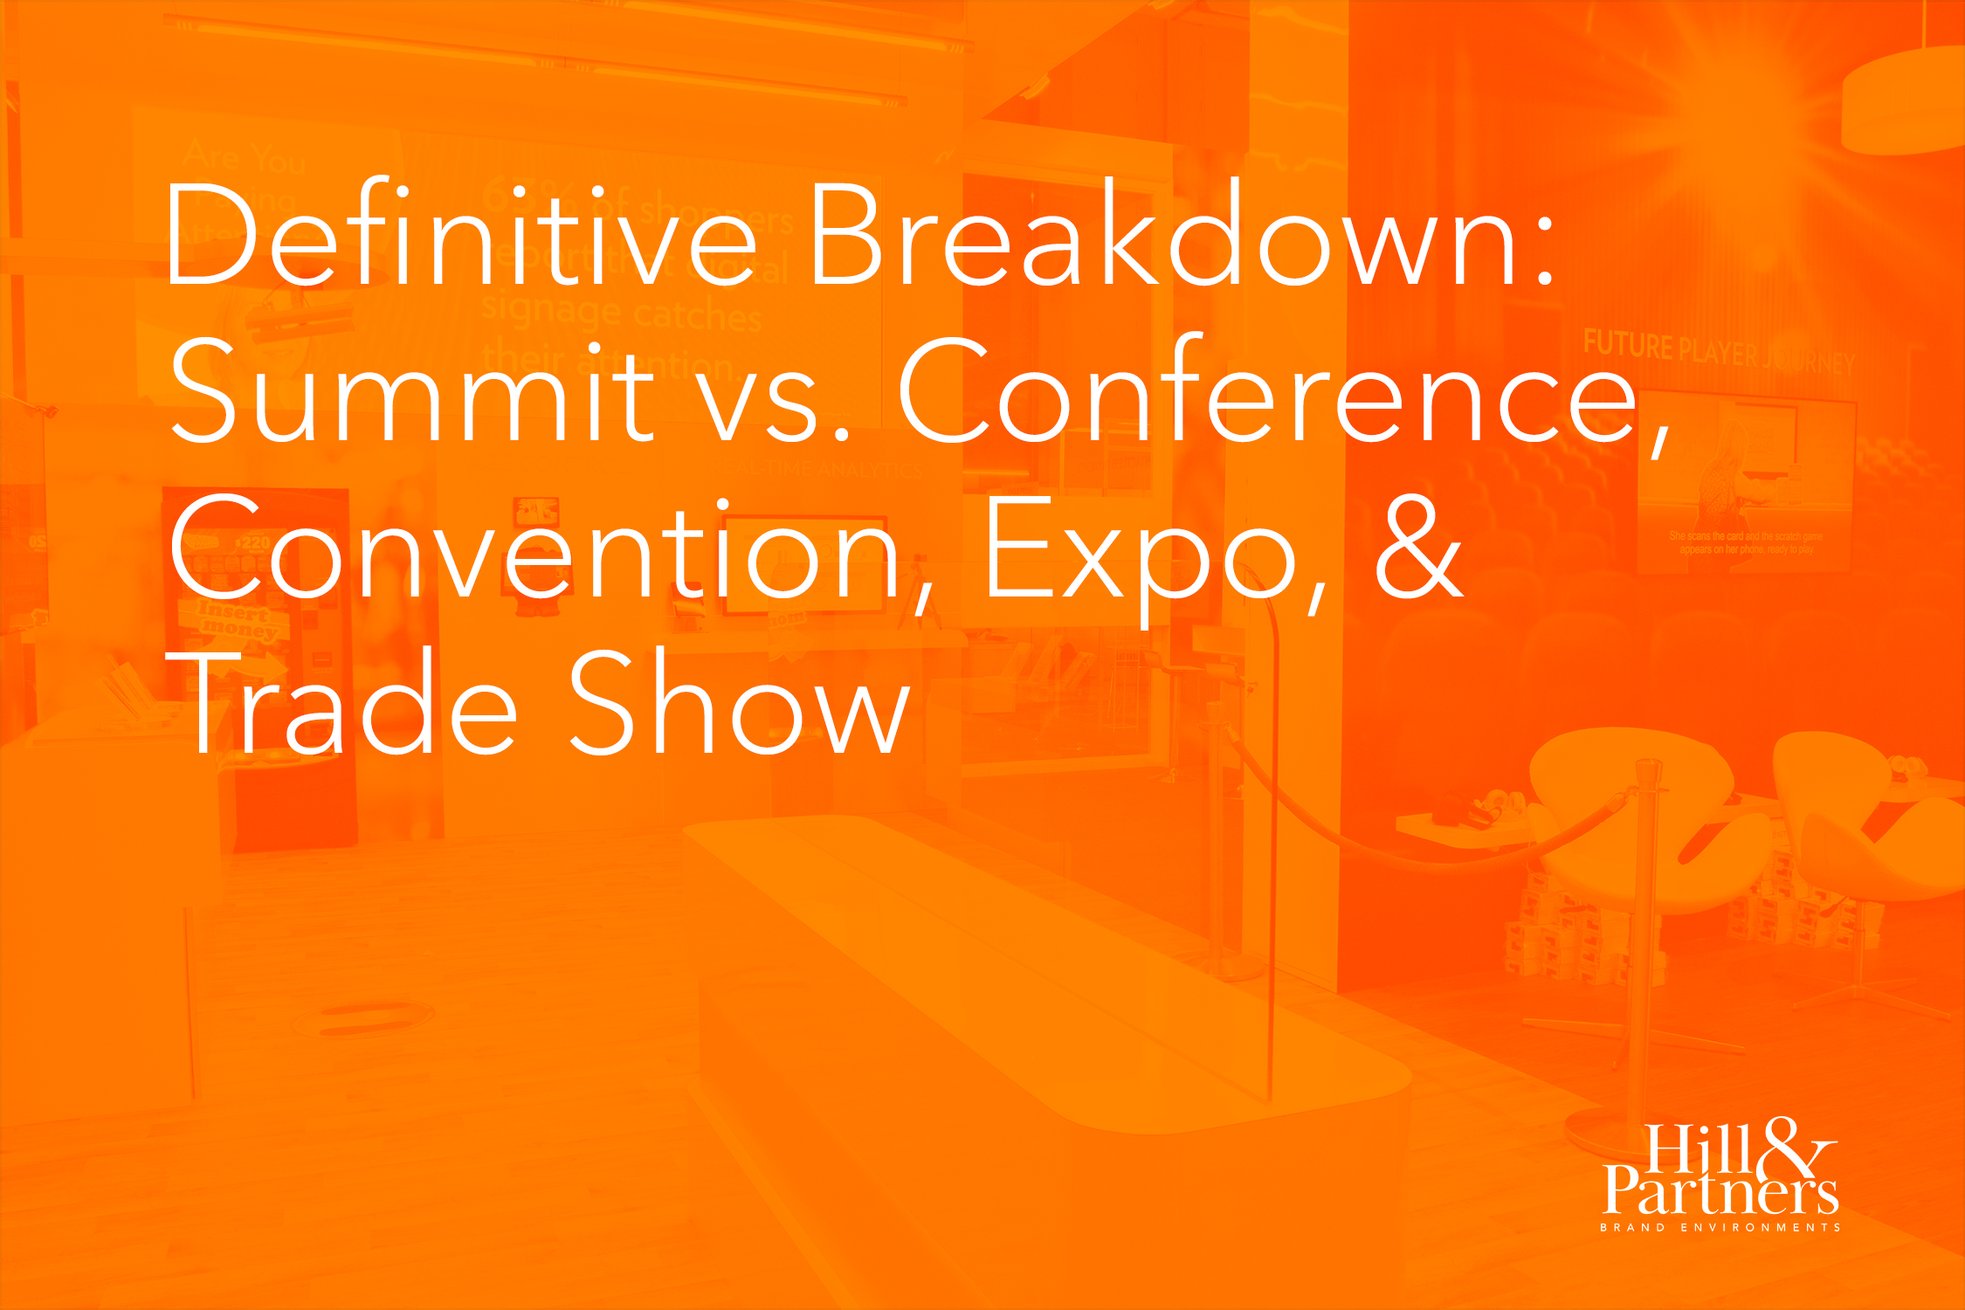 Definitive Breakdown: Summit vs. Conference, Convention, Expo, & Trade Show